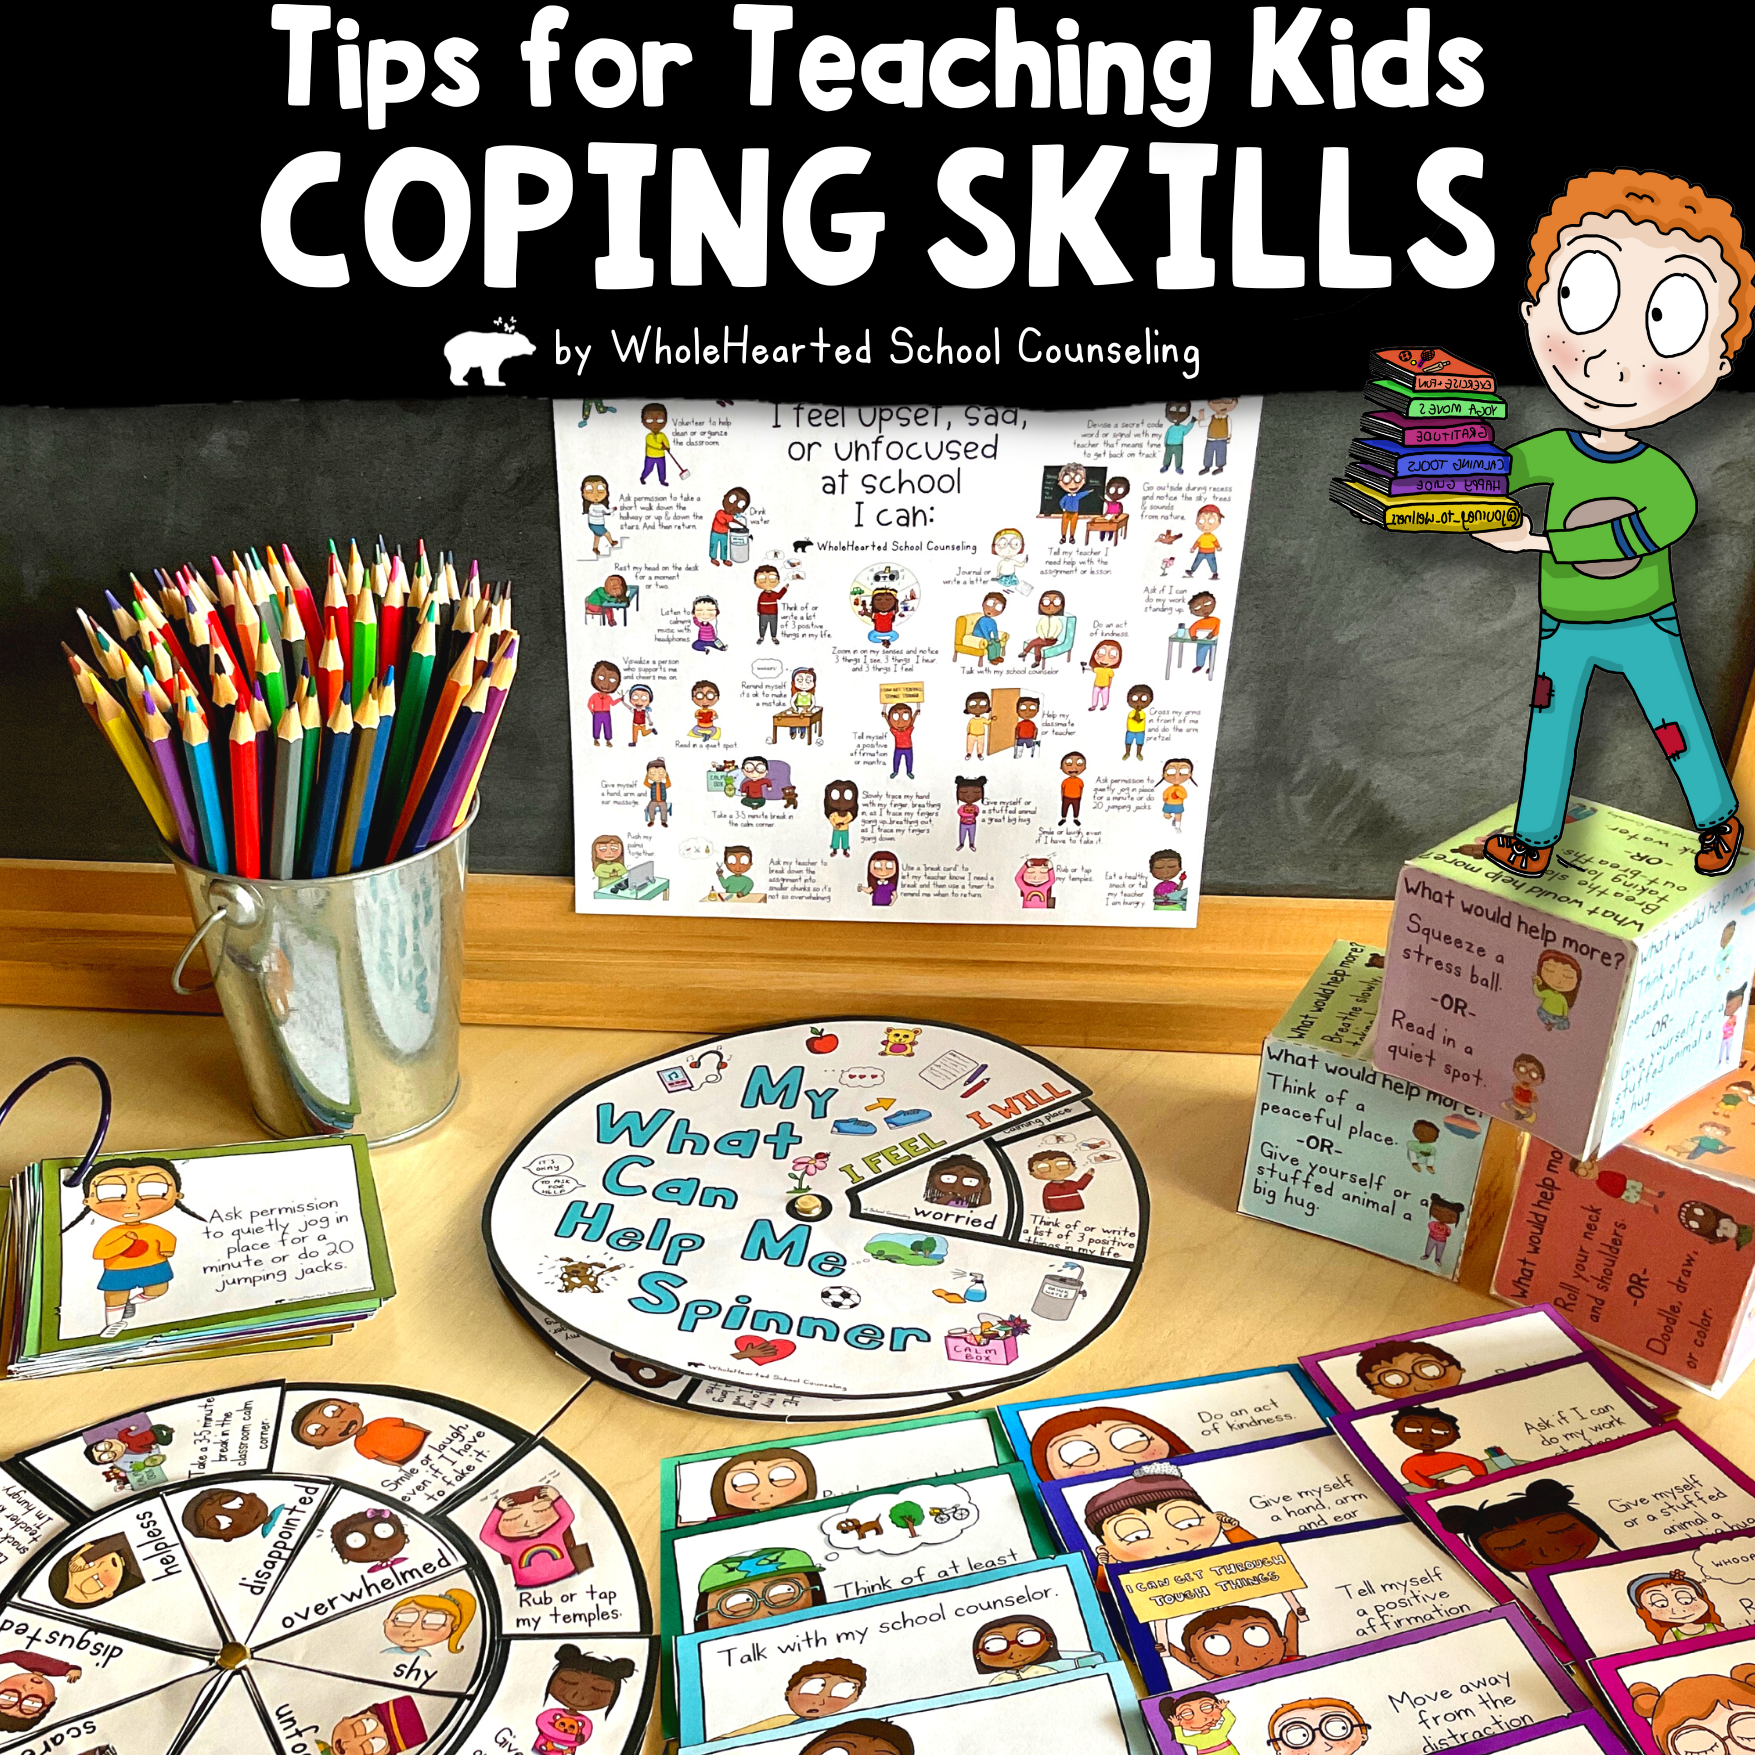 Coping skills activities like spinner, task cards, and dice for kids.